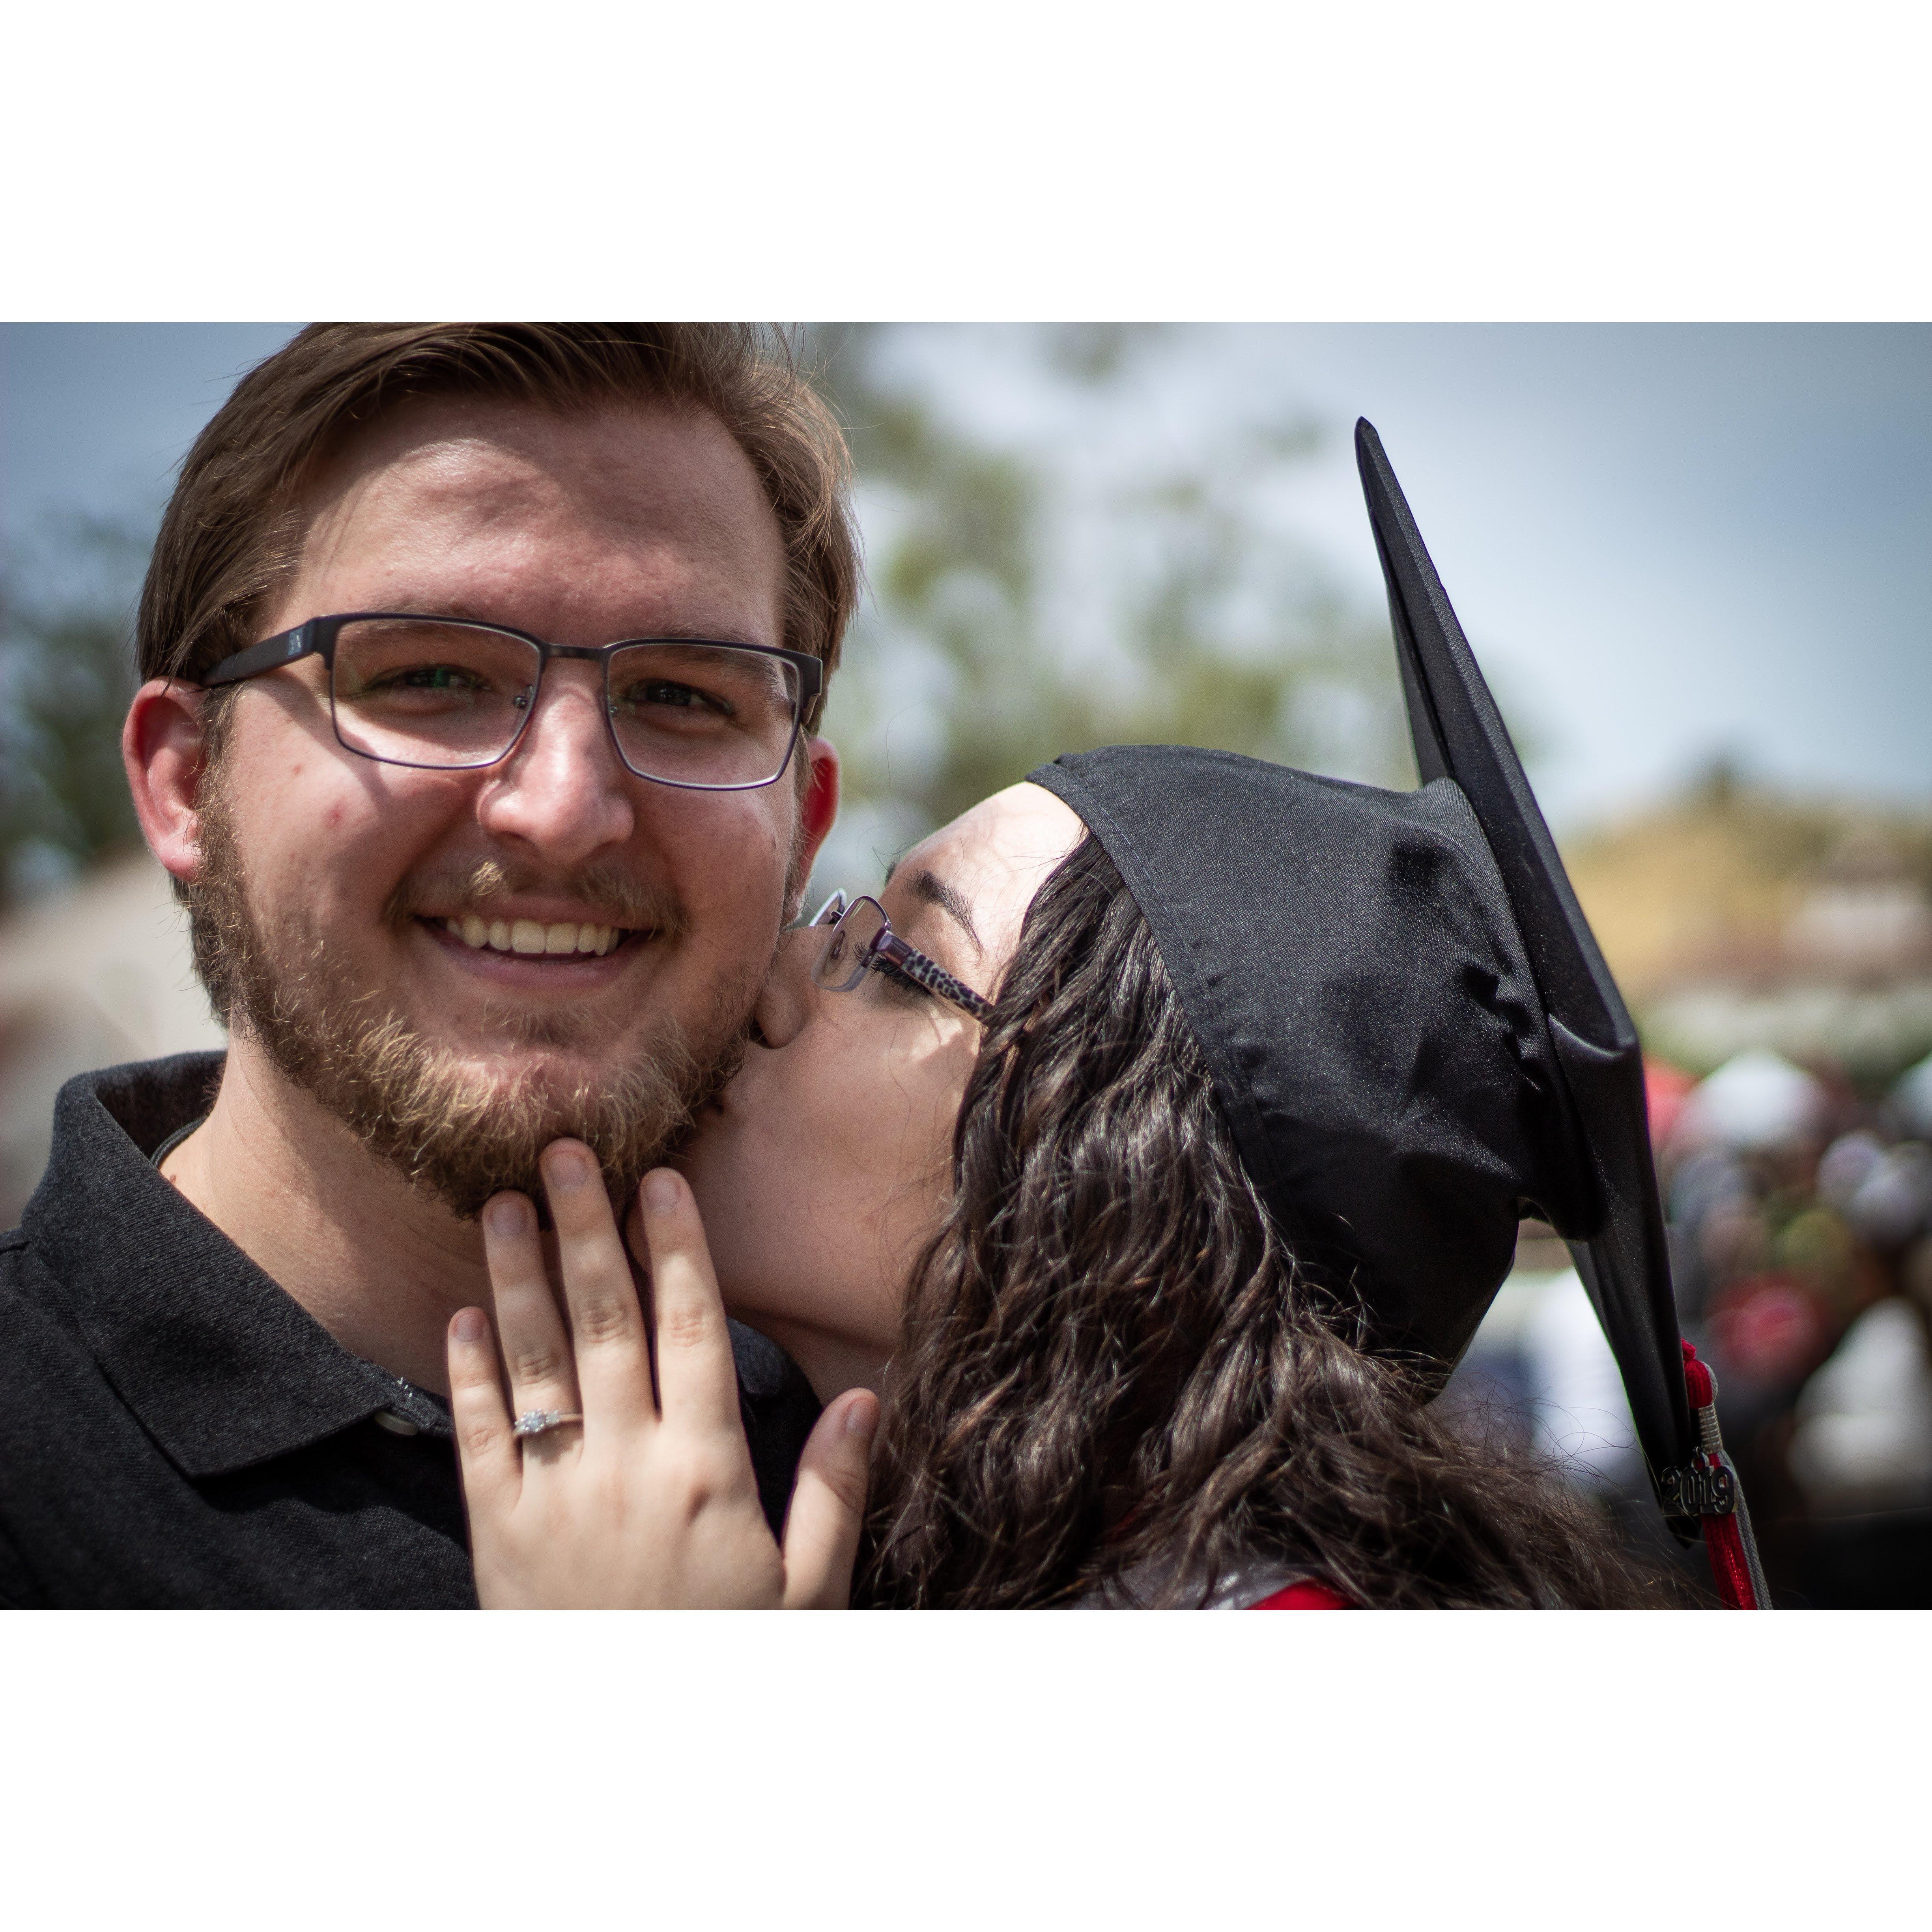 Ashley's graduation from CSU Channel Islands in Spring 2019, 3 days after getting engaged, 2 days before moving to Costa Mesa, and 10 days before starting the masters & teaching credential program.